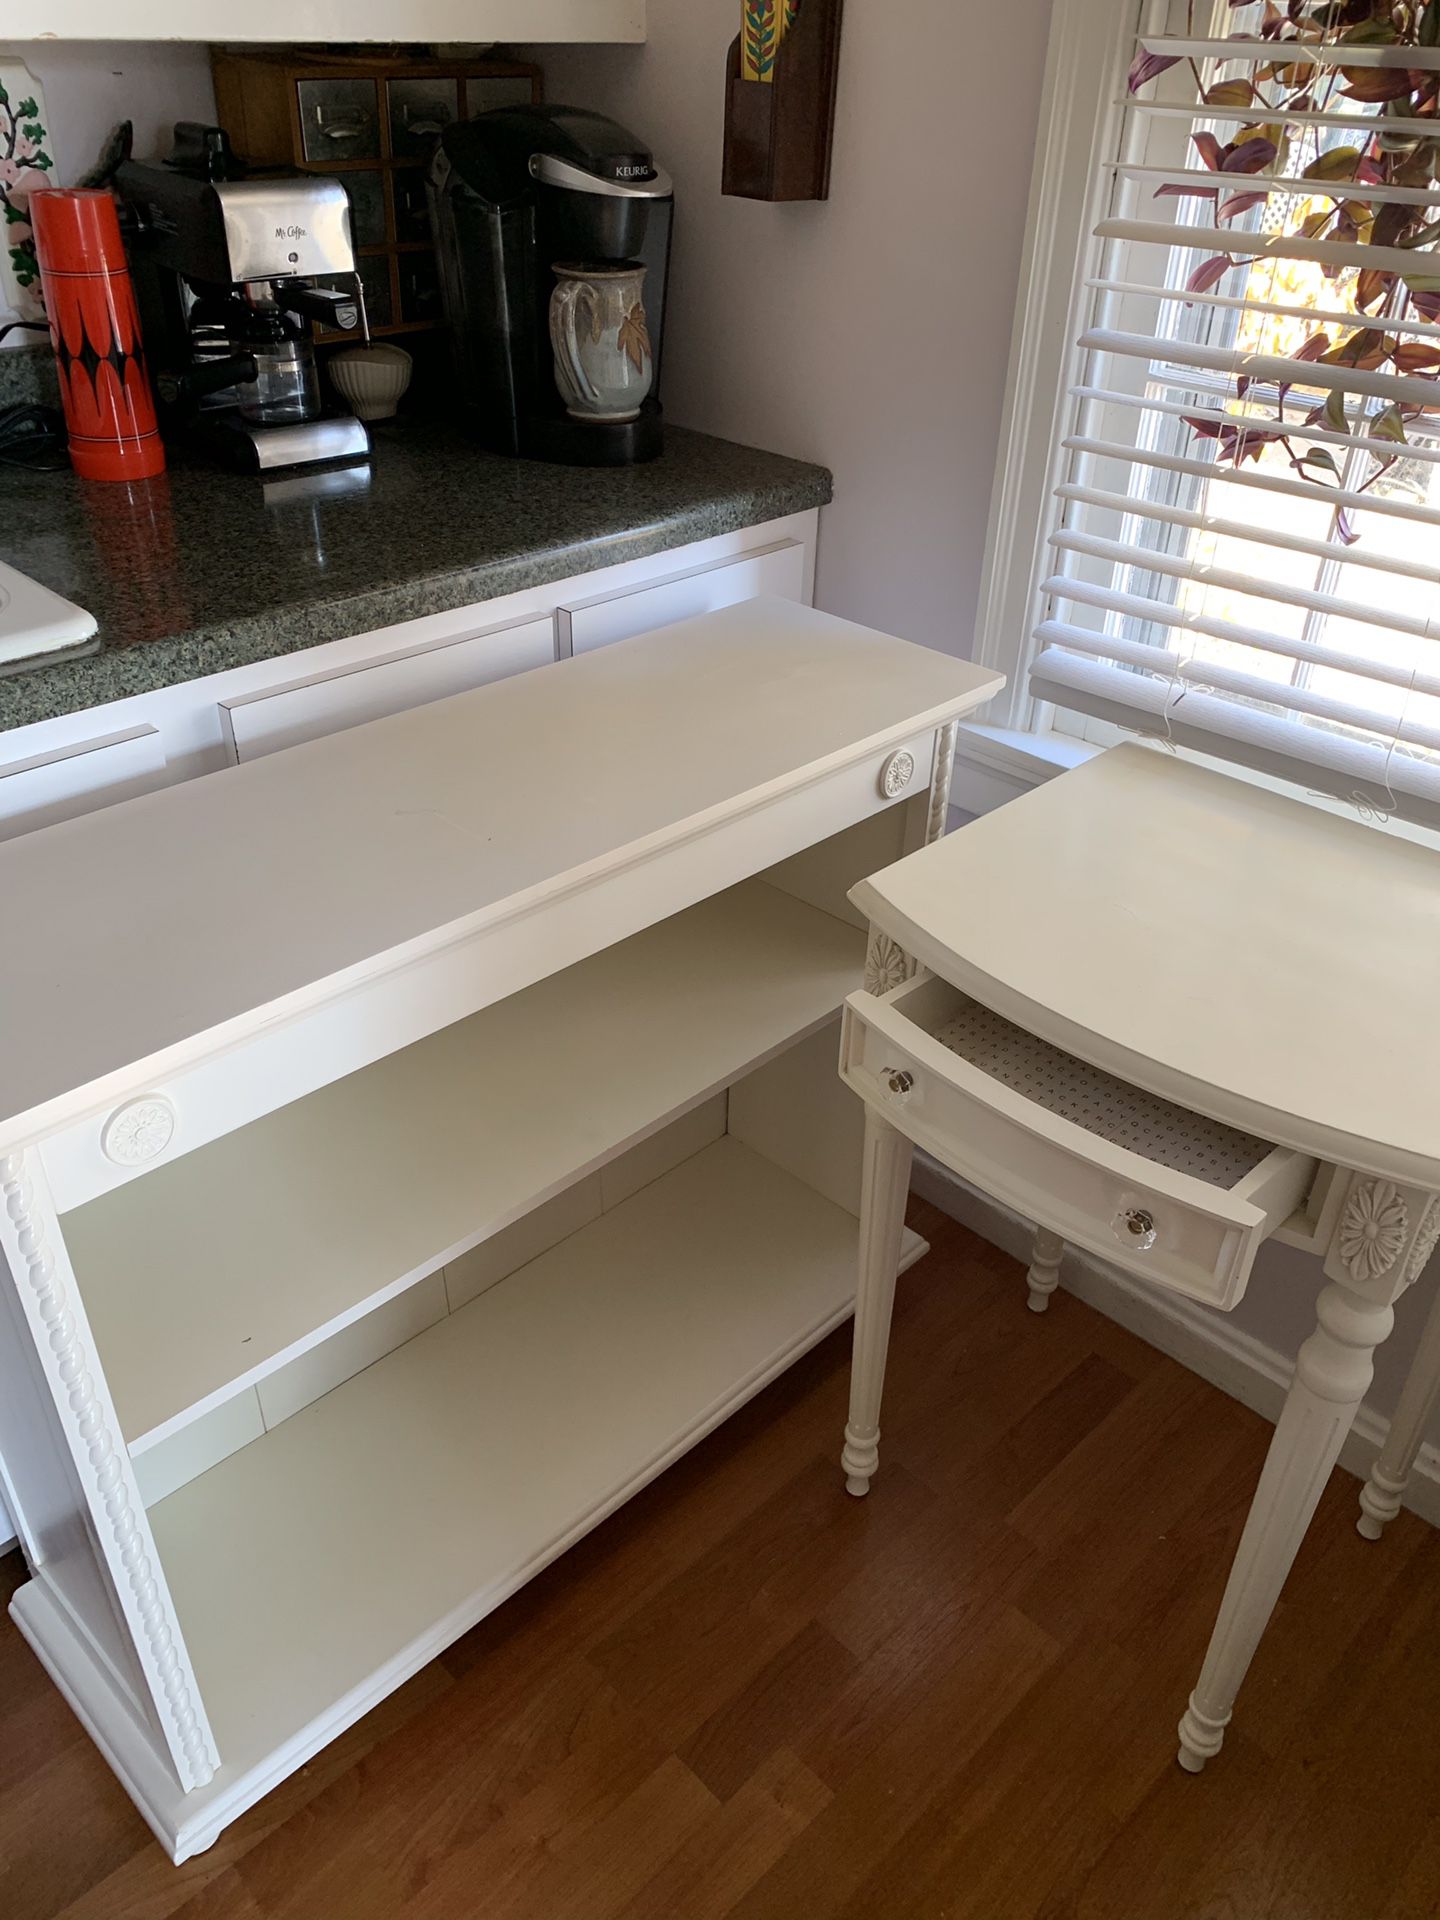 Bookcase & Side Table / Nightstand Price for Both